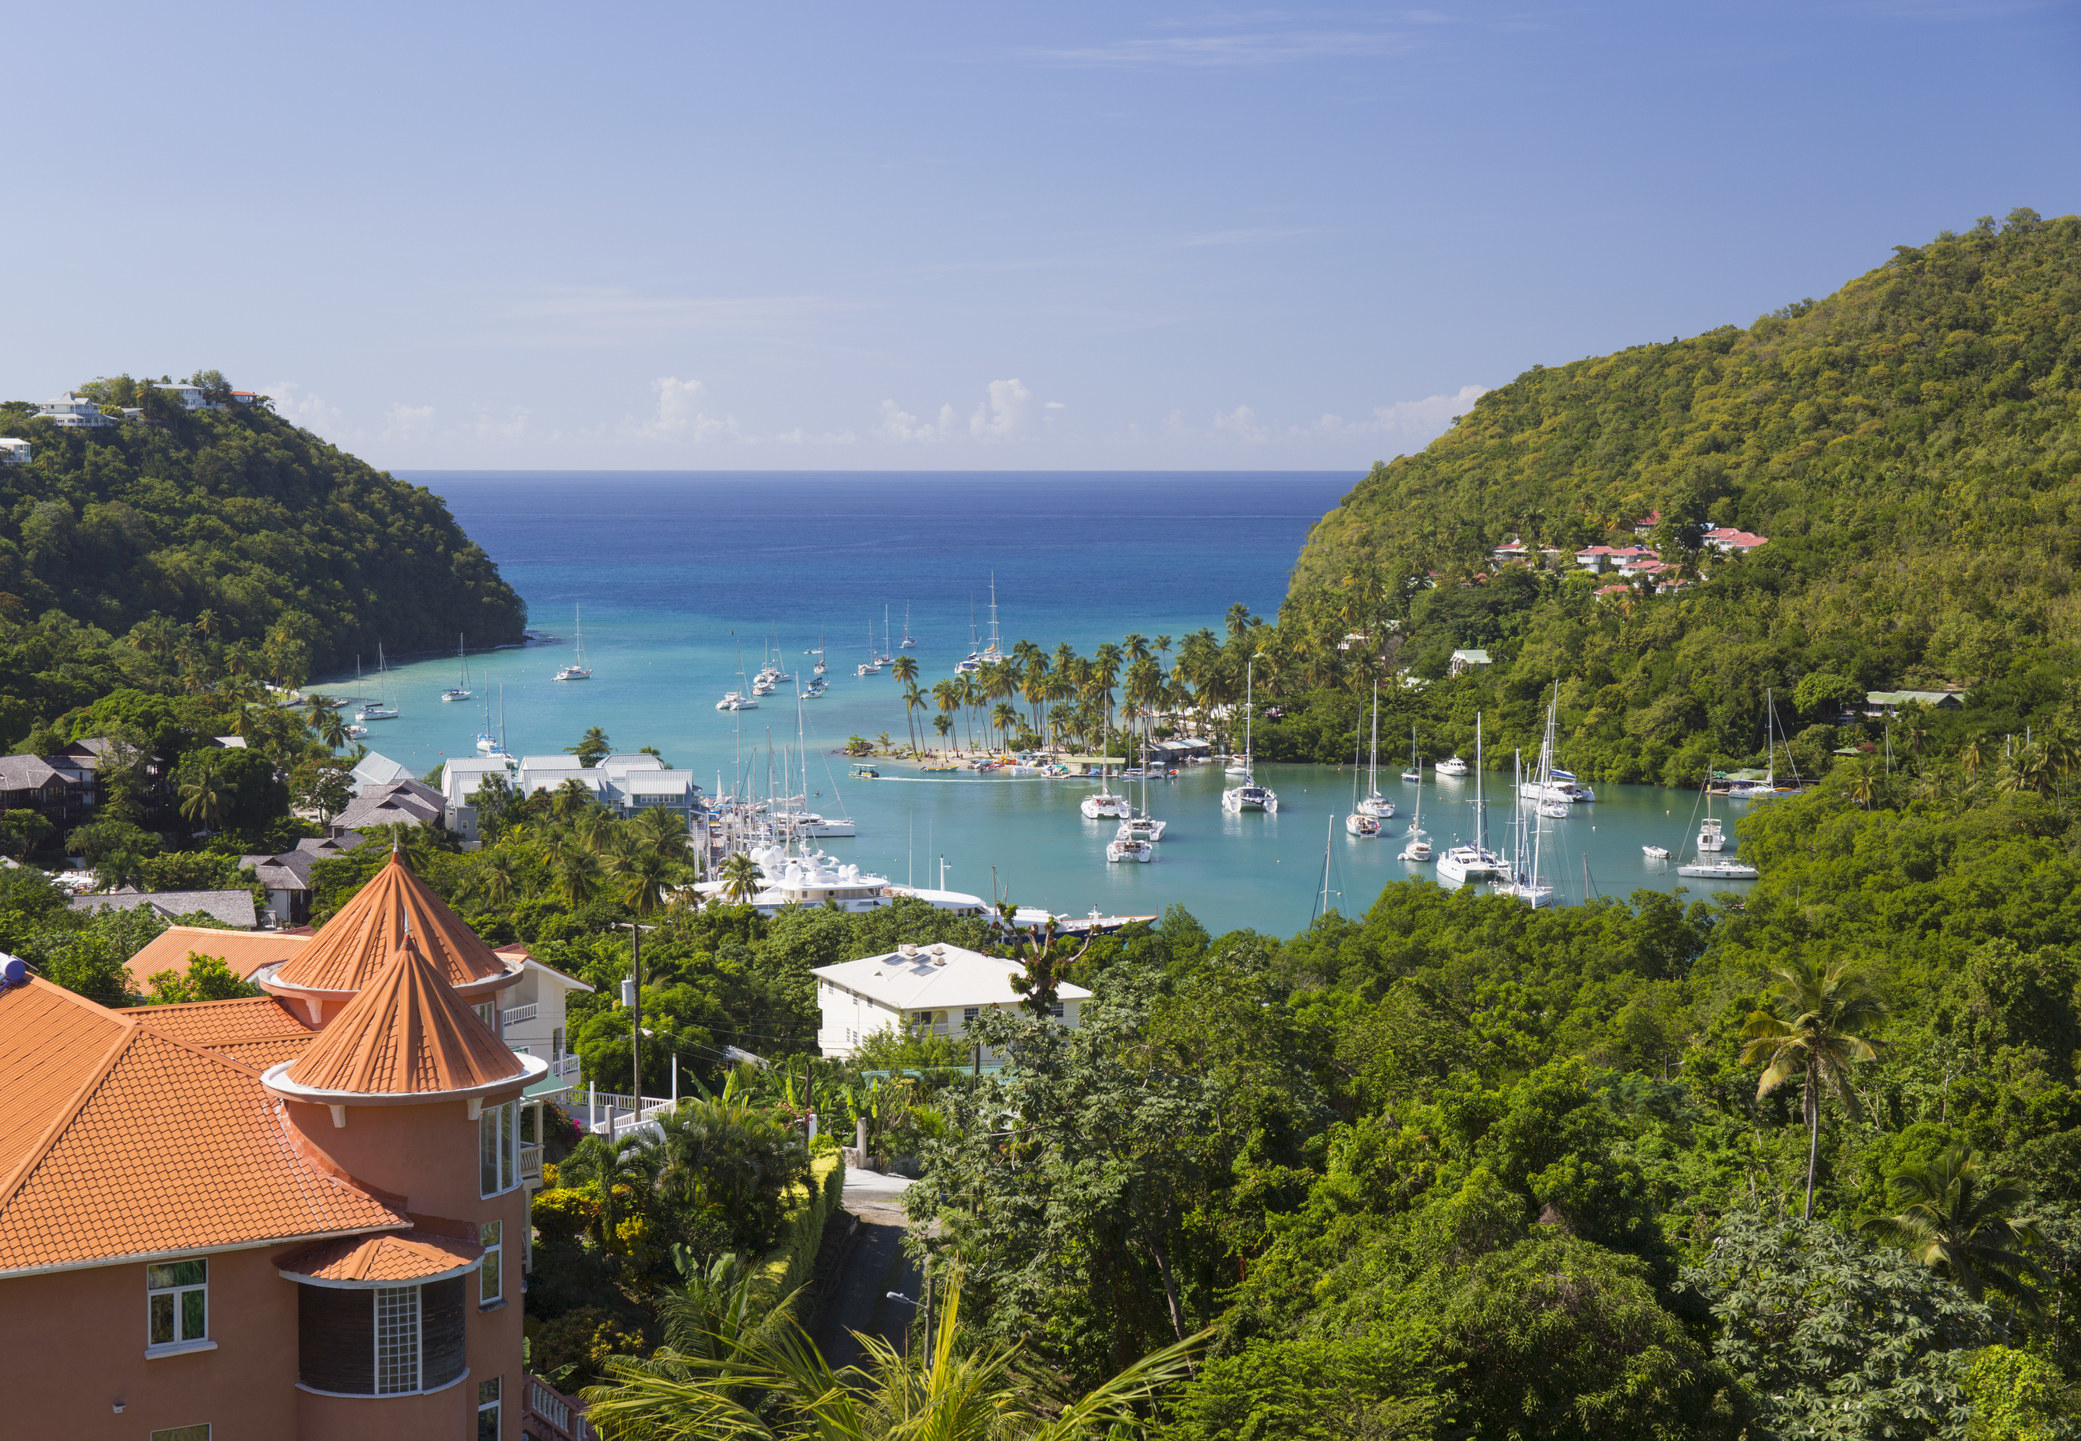 An exotic locale with a resort and trees and boats alongside the ocean